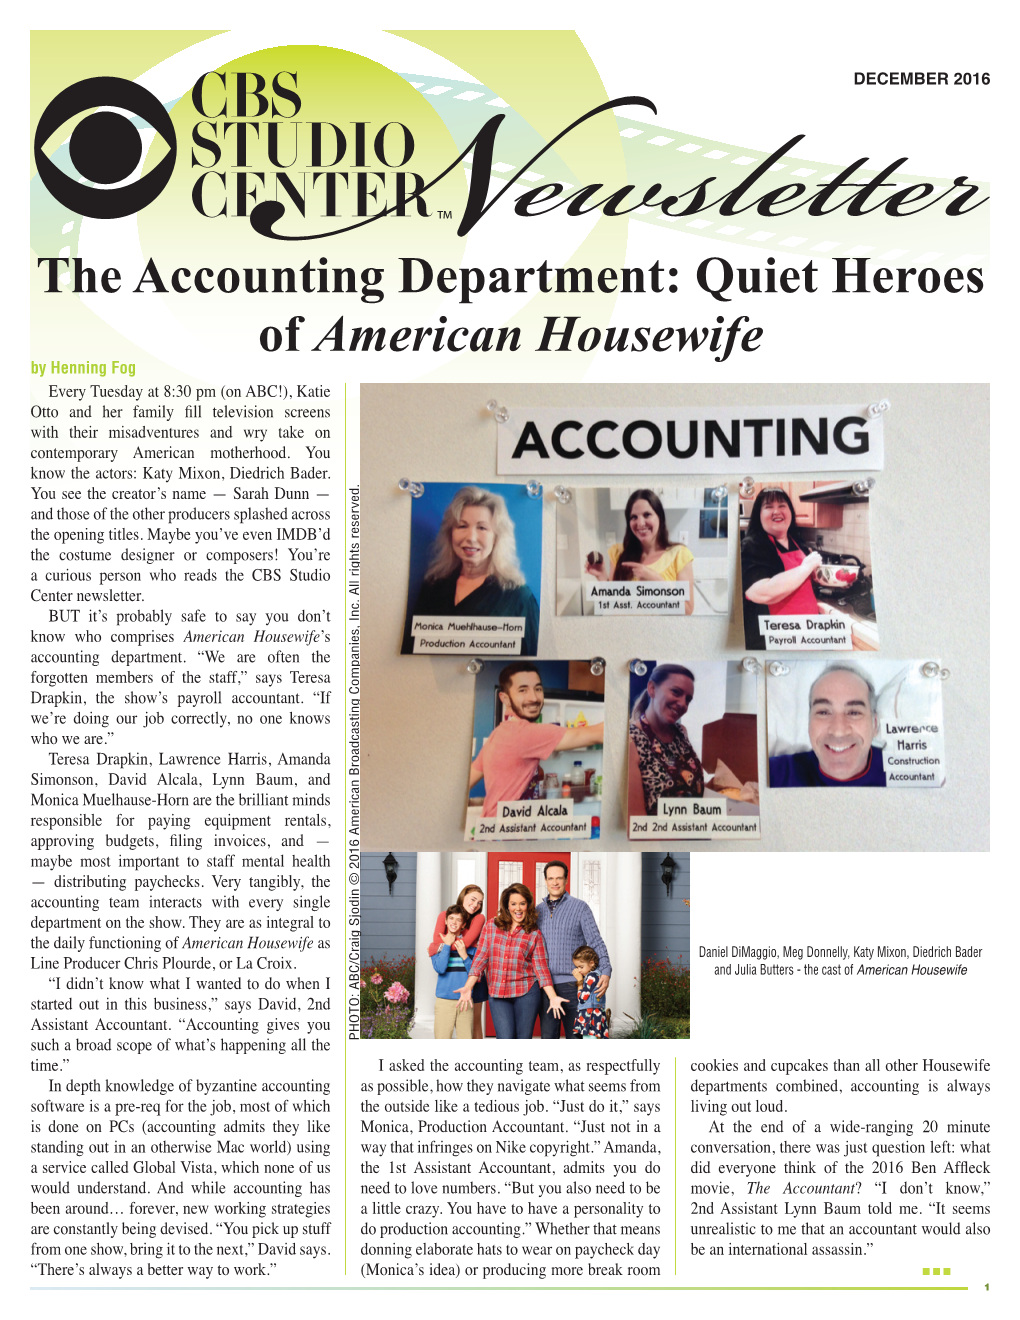 The Accounting Department: Quiet Heroes of American Housewife